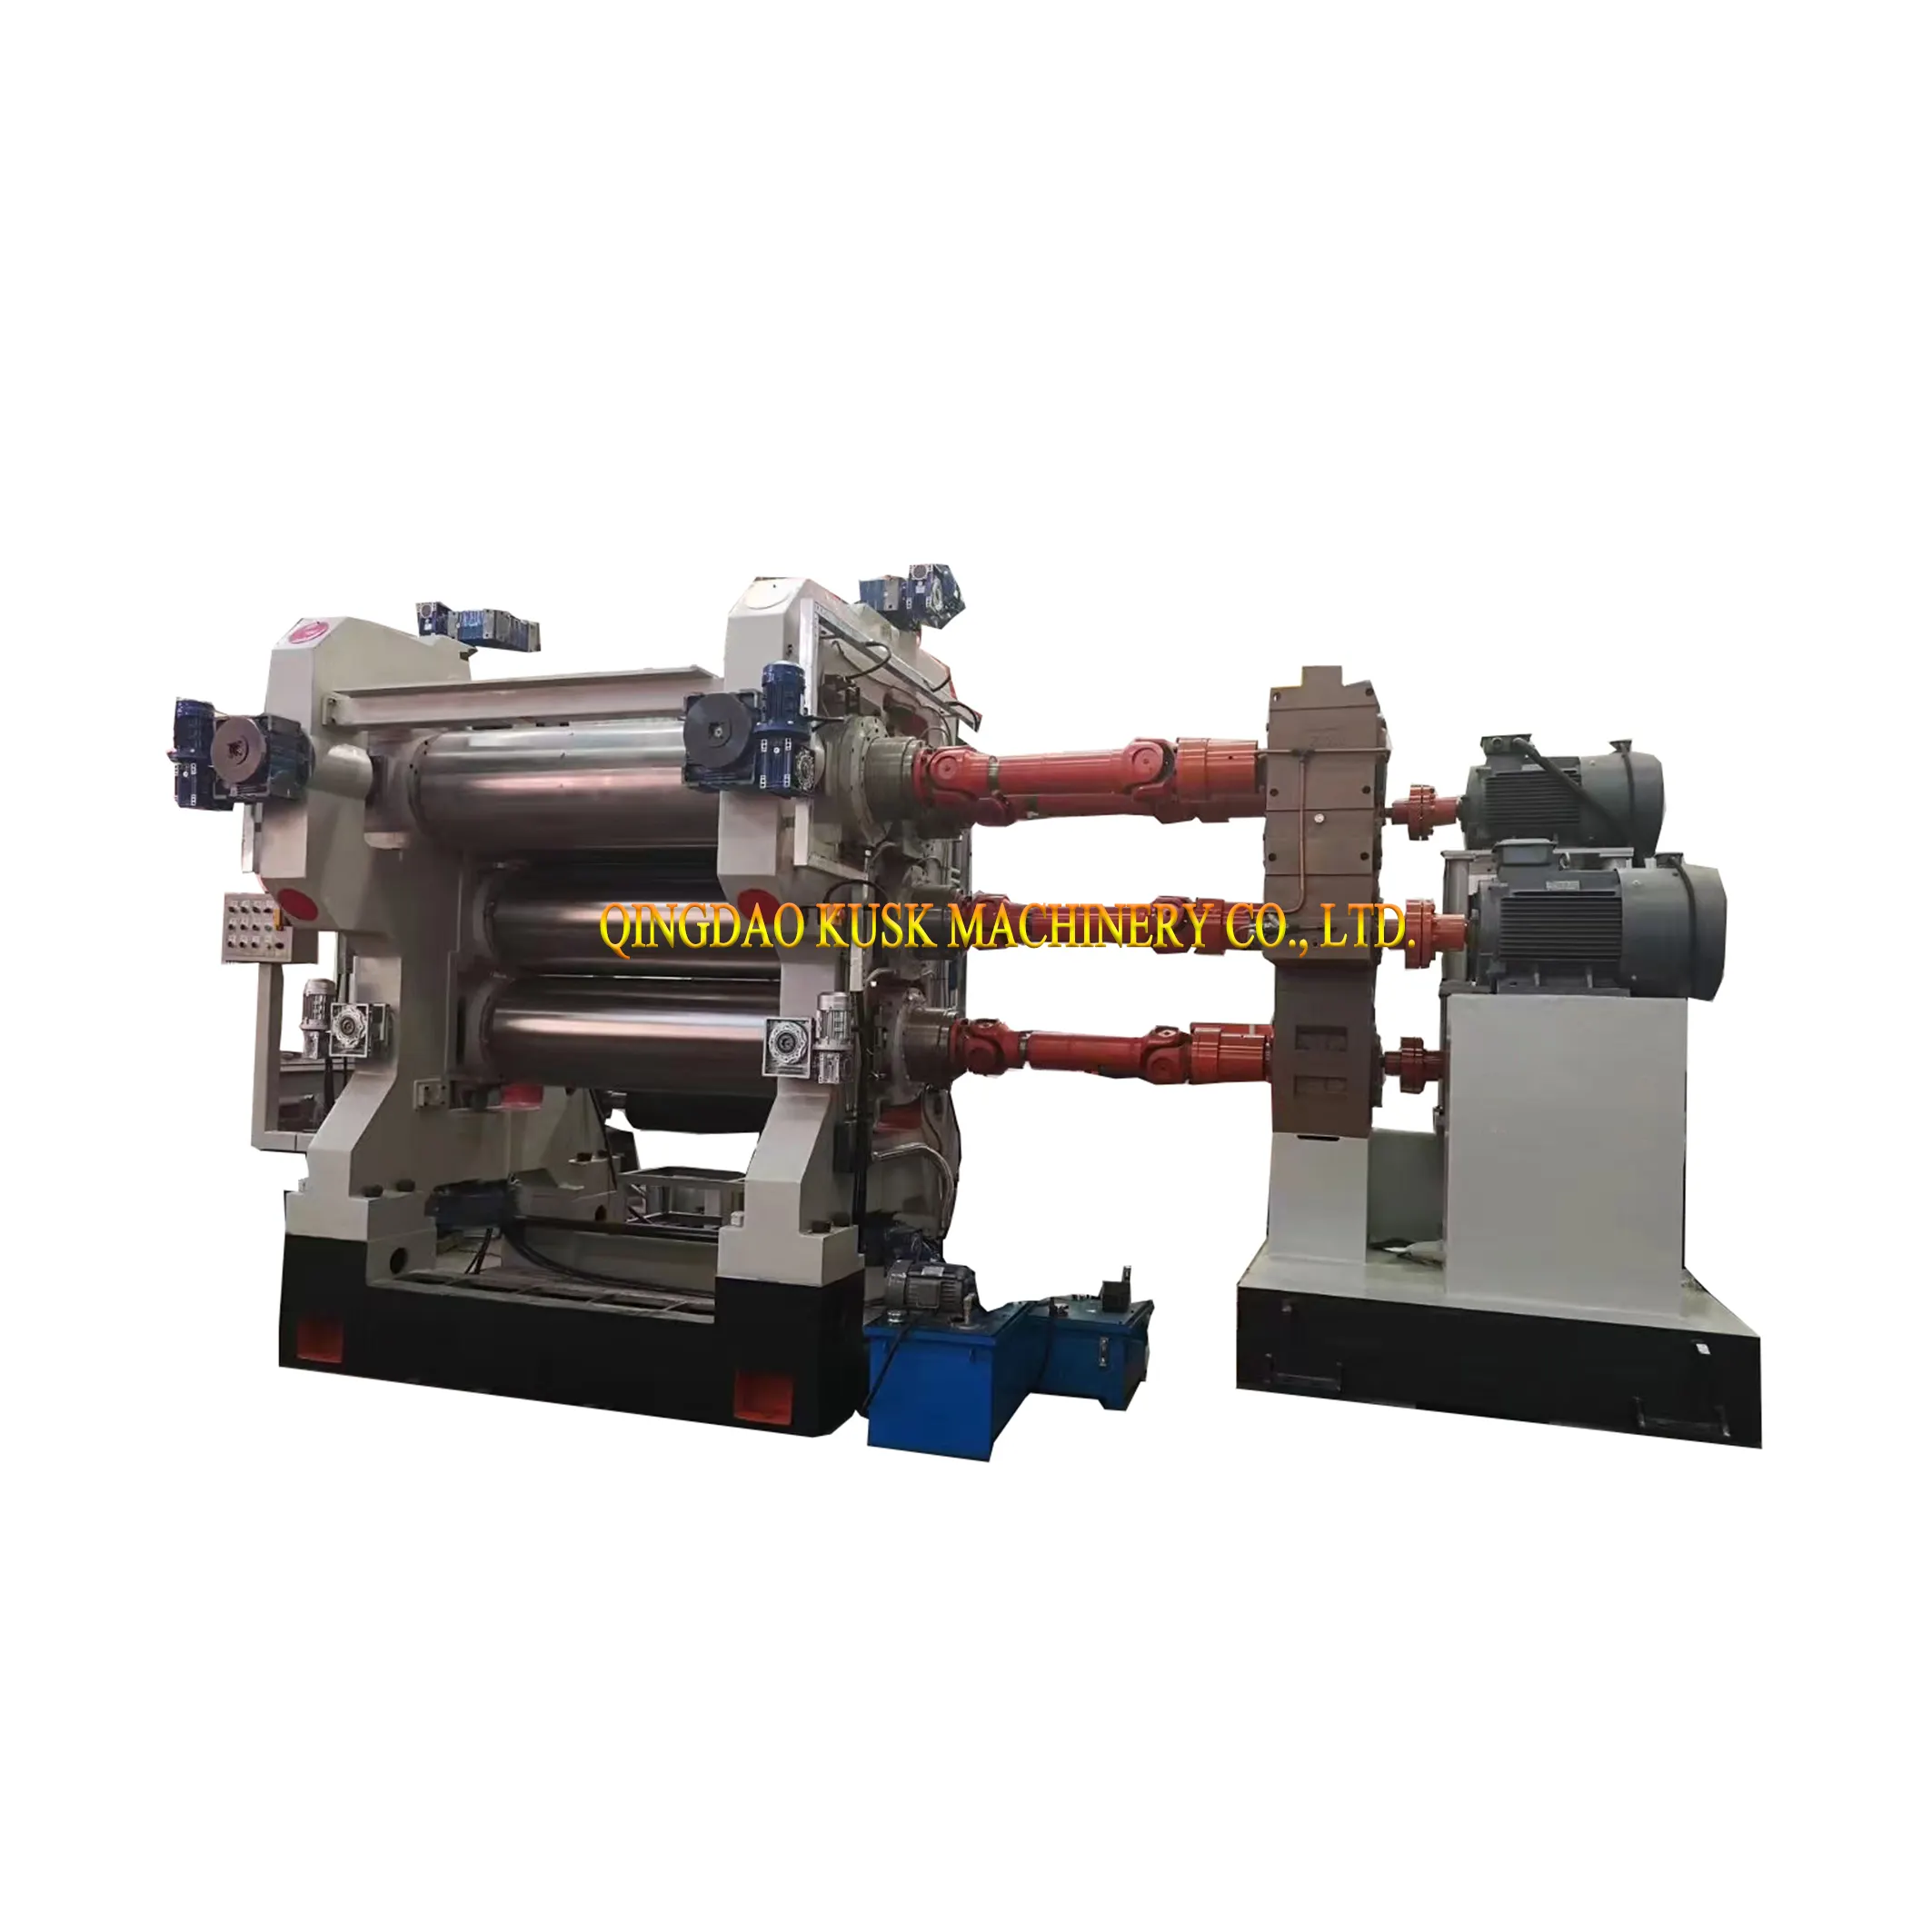 High Performance 2, 3, 4 Roll Rubber Calender/Calendering Roll Mill Machine for PVC Film Production Line